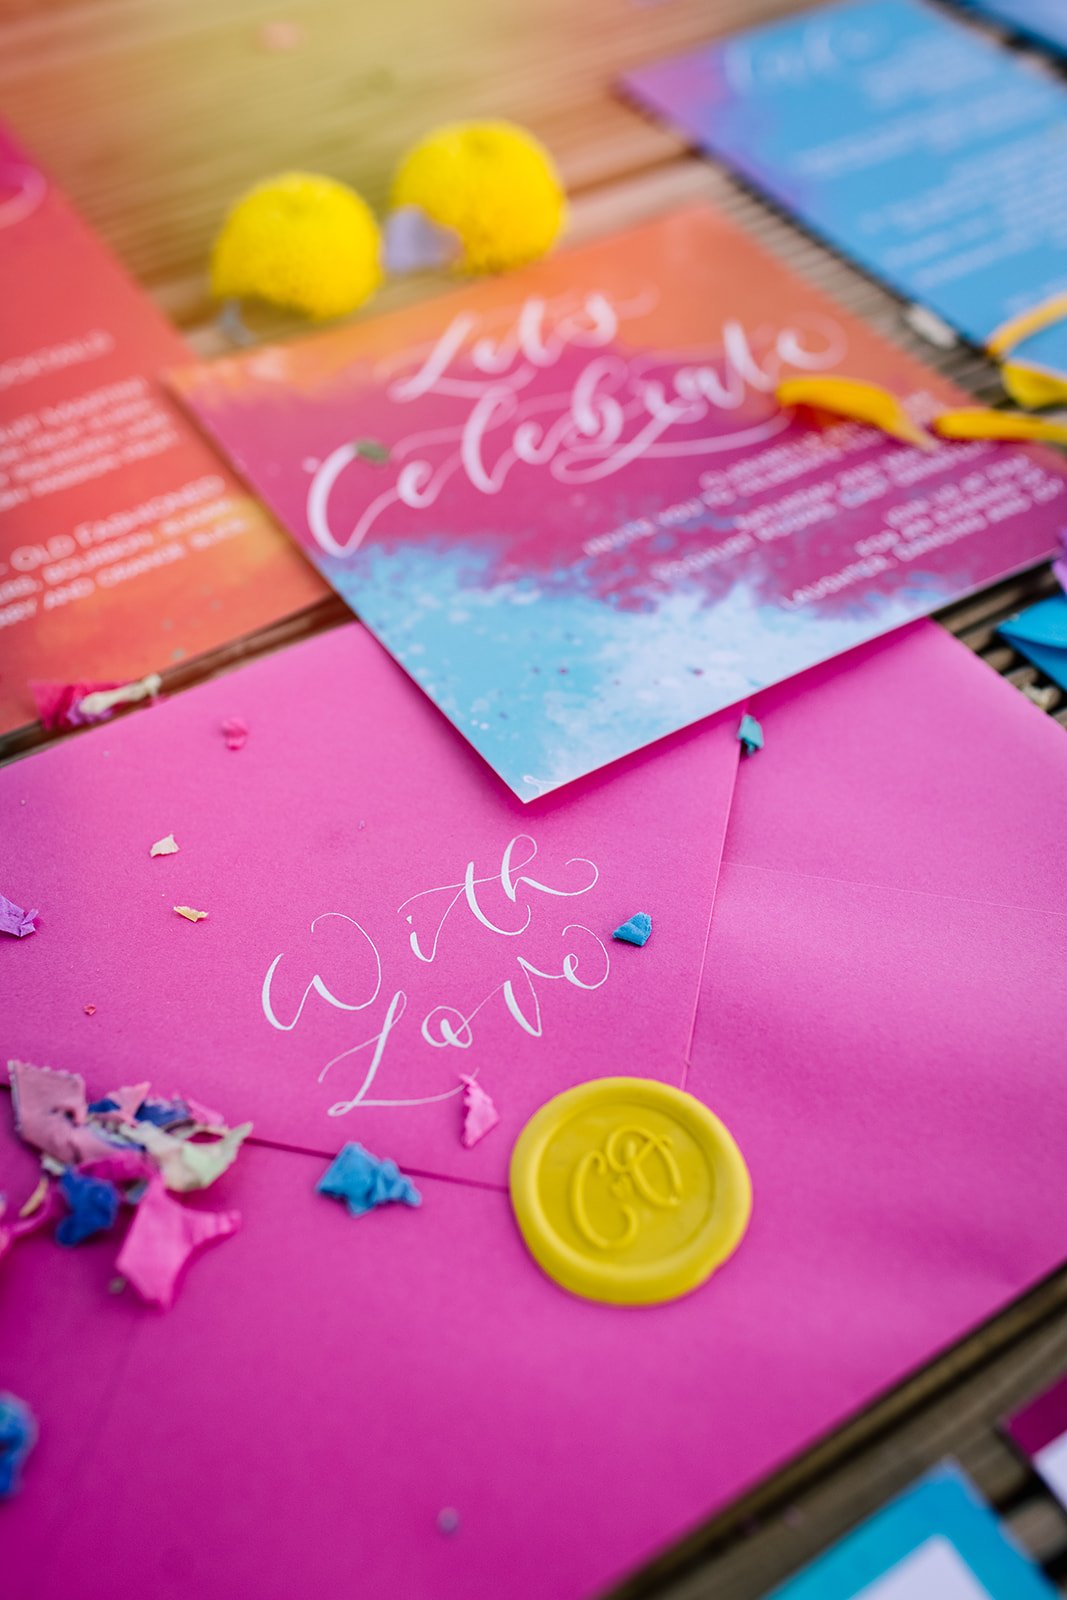 Festival wedding stationery watercolour wedding stationery with hot pink orange and blue,calligraphy, custom wax seals and calligraphy envelopes initial monogram wax seal.jpg